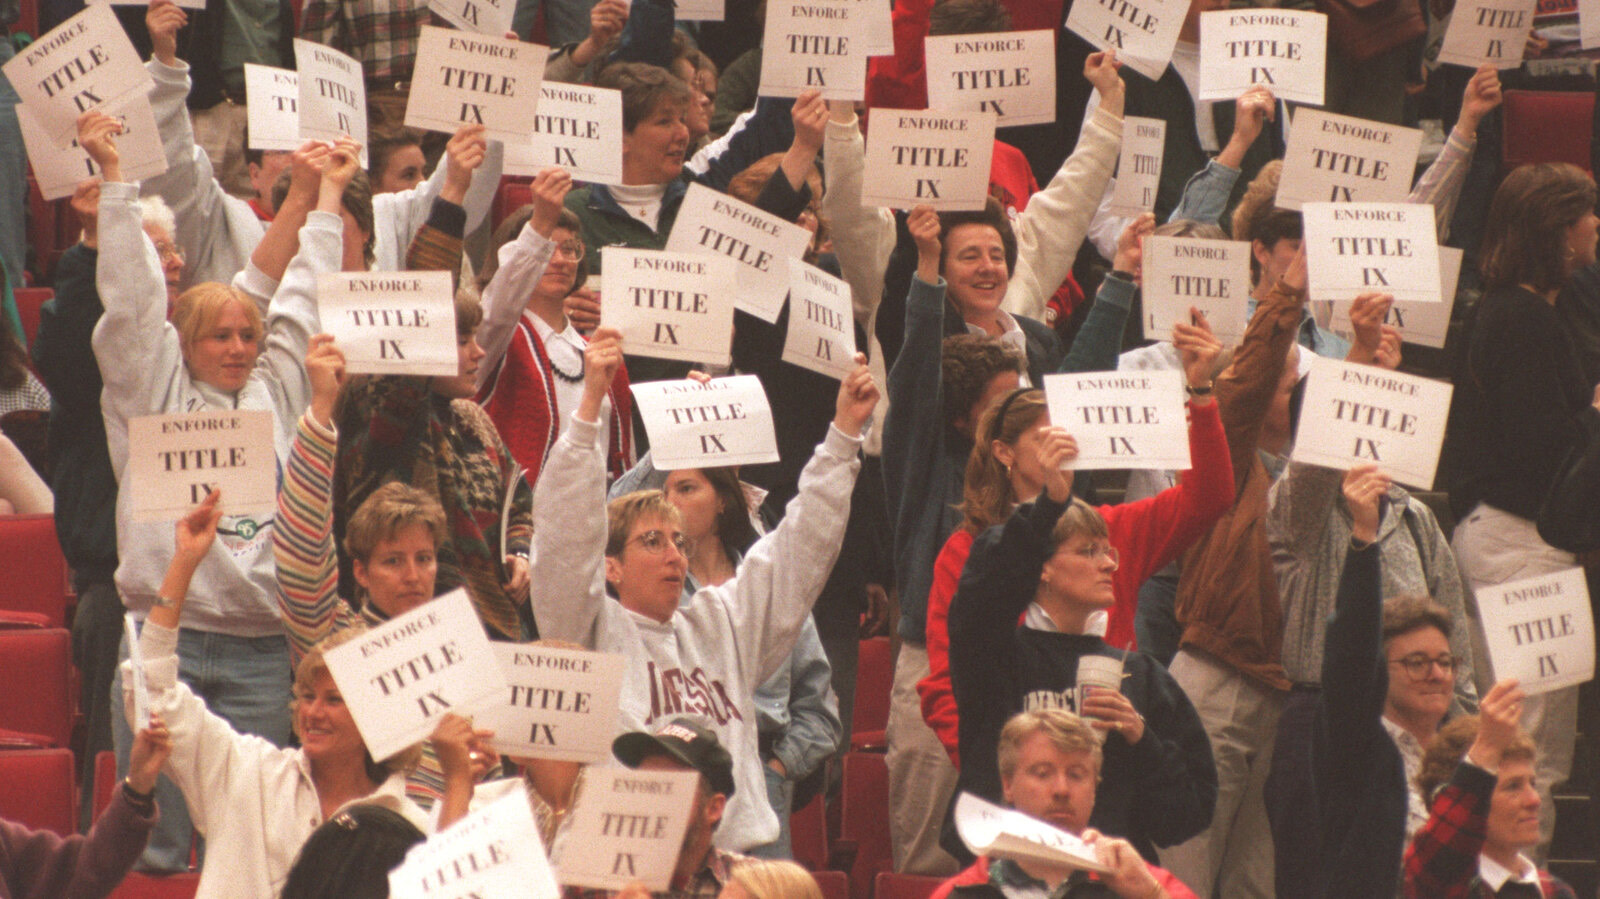 Students protesting for the enforcement of Title IX at an NCAA Women’s Basketball Tournament in 1995.